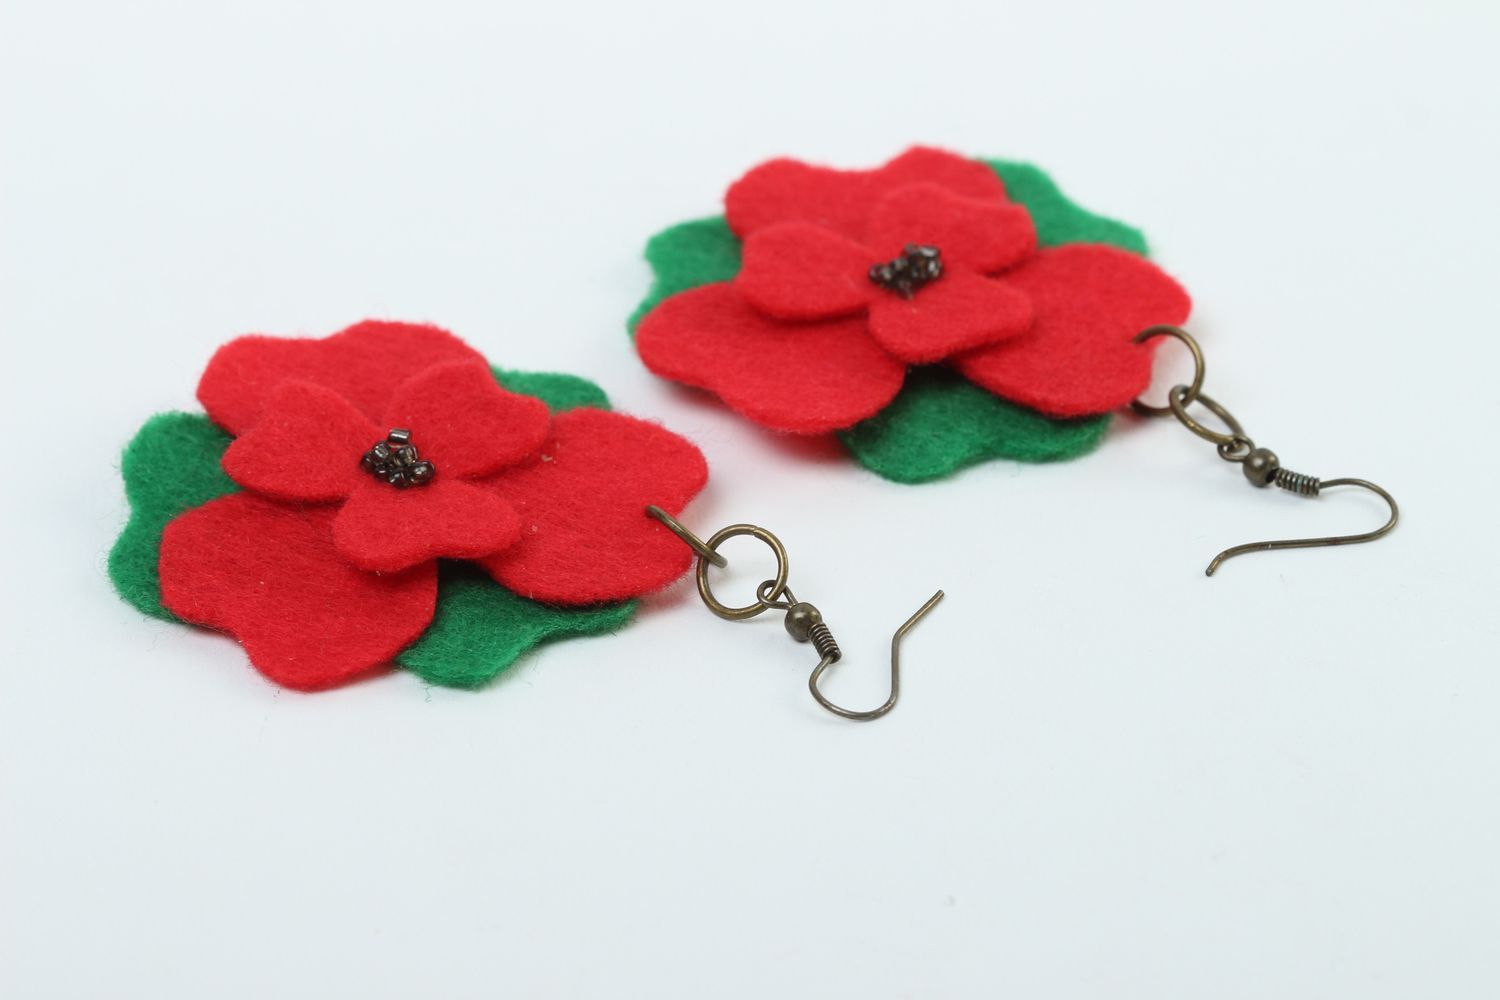 Handmade felted wool earrings fashion accessories for girls needle felting photo 3